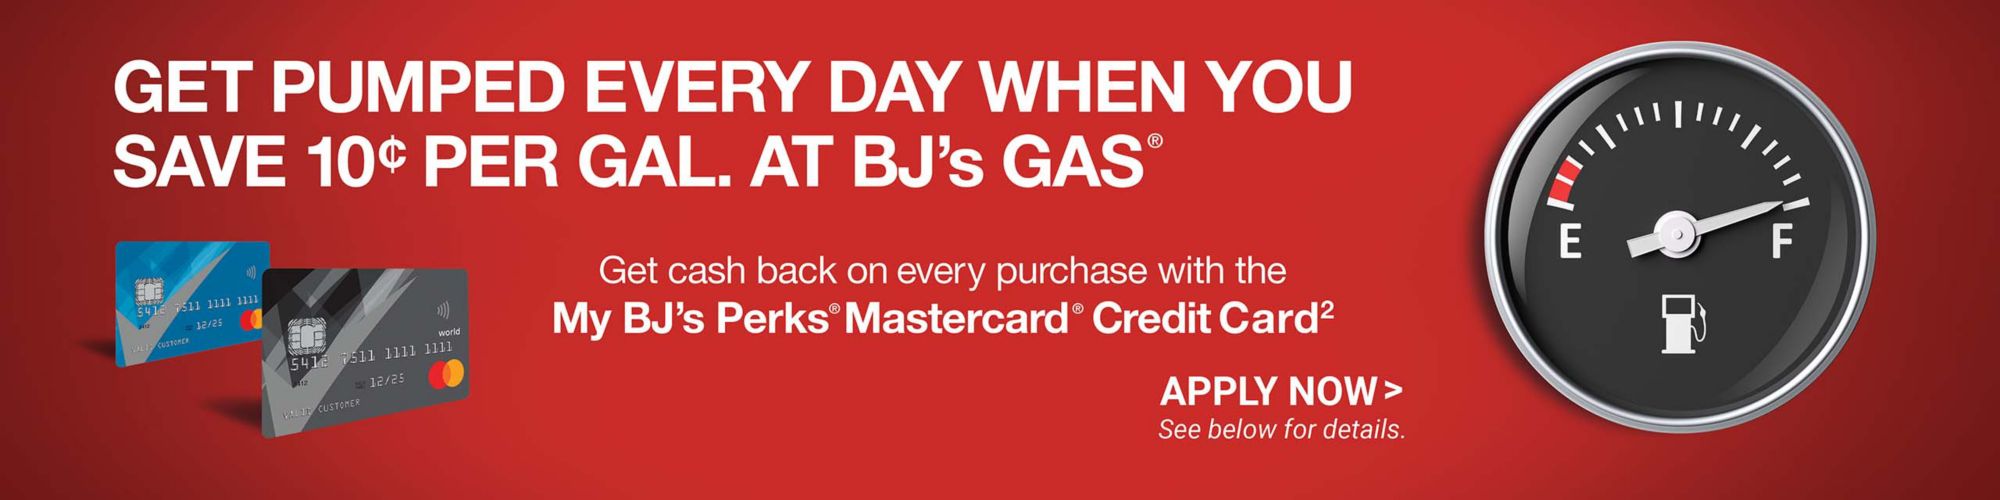 Get pumped every day when you save $0.10 per gal. at BJ's Gas®. Get cash back on every purchase witih the My BJ's Perks® Mastercard® Credit Card2. Apply Now > See below for details